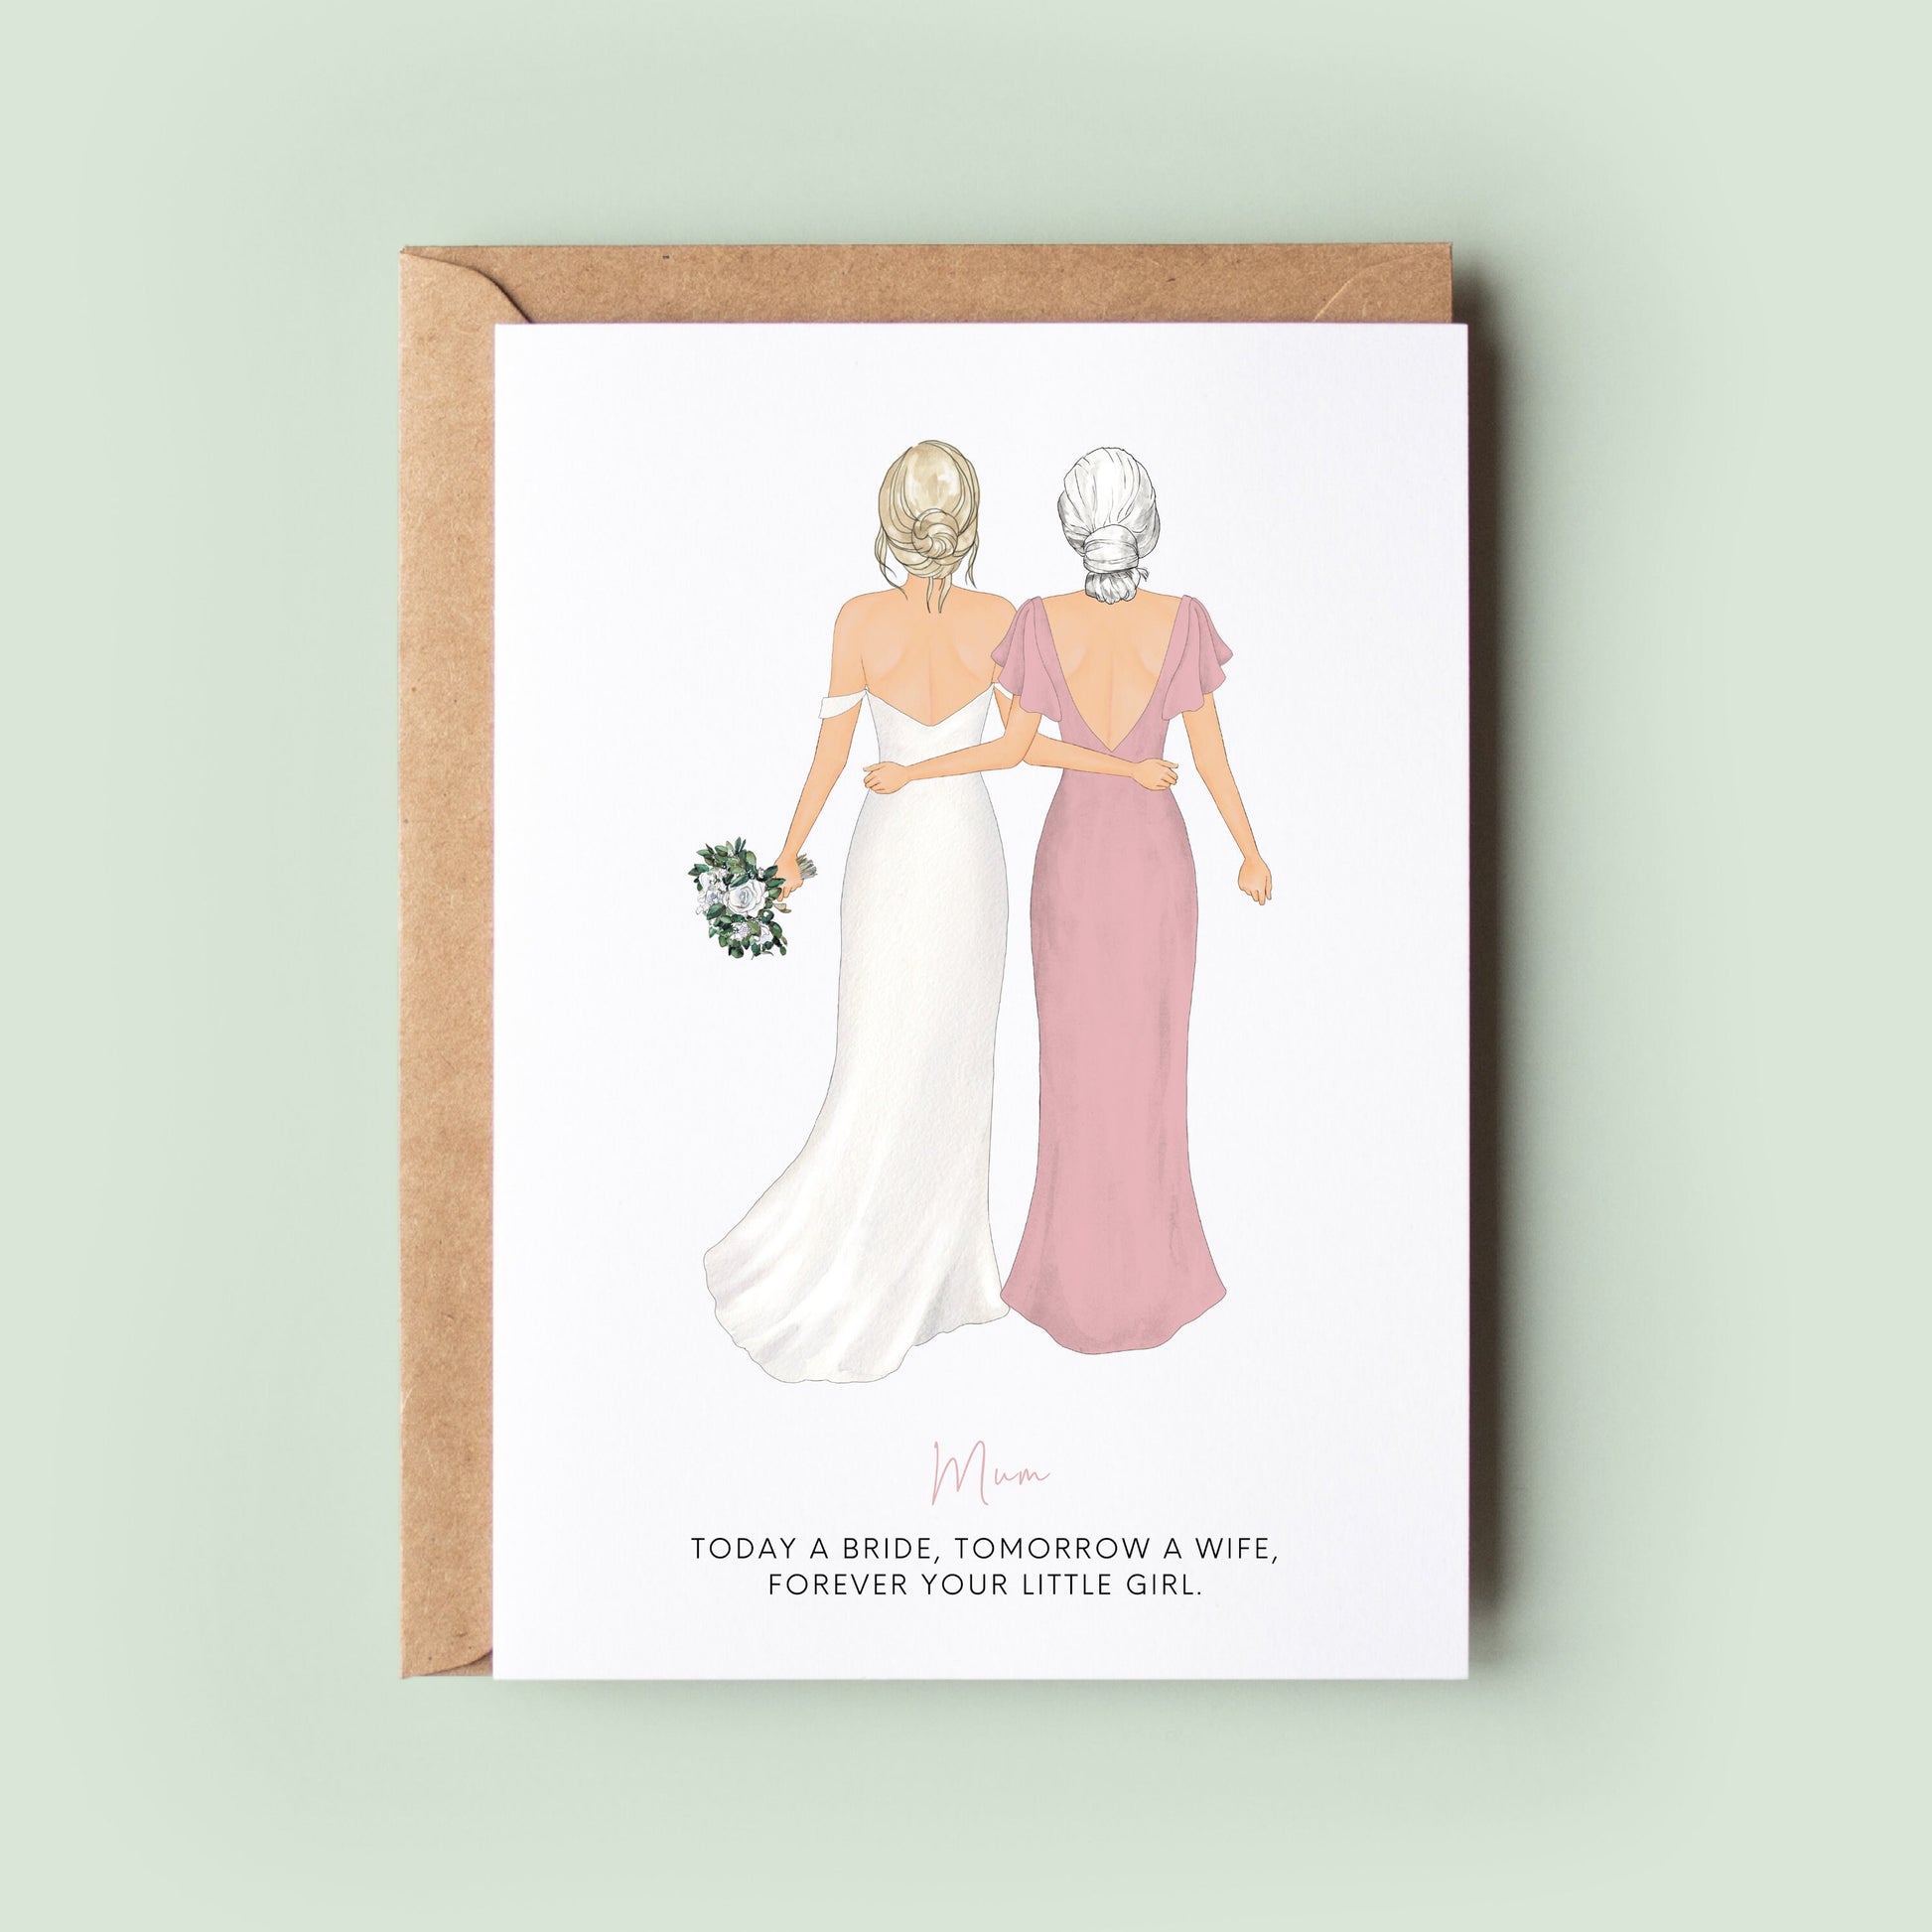 Personalised Wedding Card, Mother of the Bride, Mother of the Groom, Wedding Thank You Card, Mum Card, Wedding Card, Wedding Party #11001